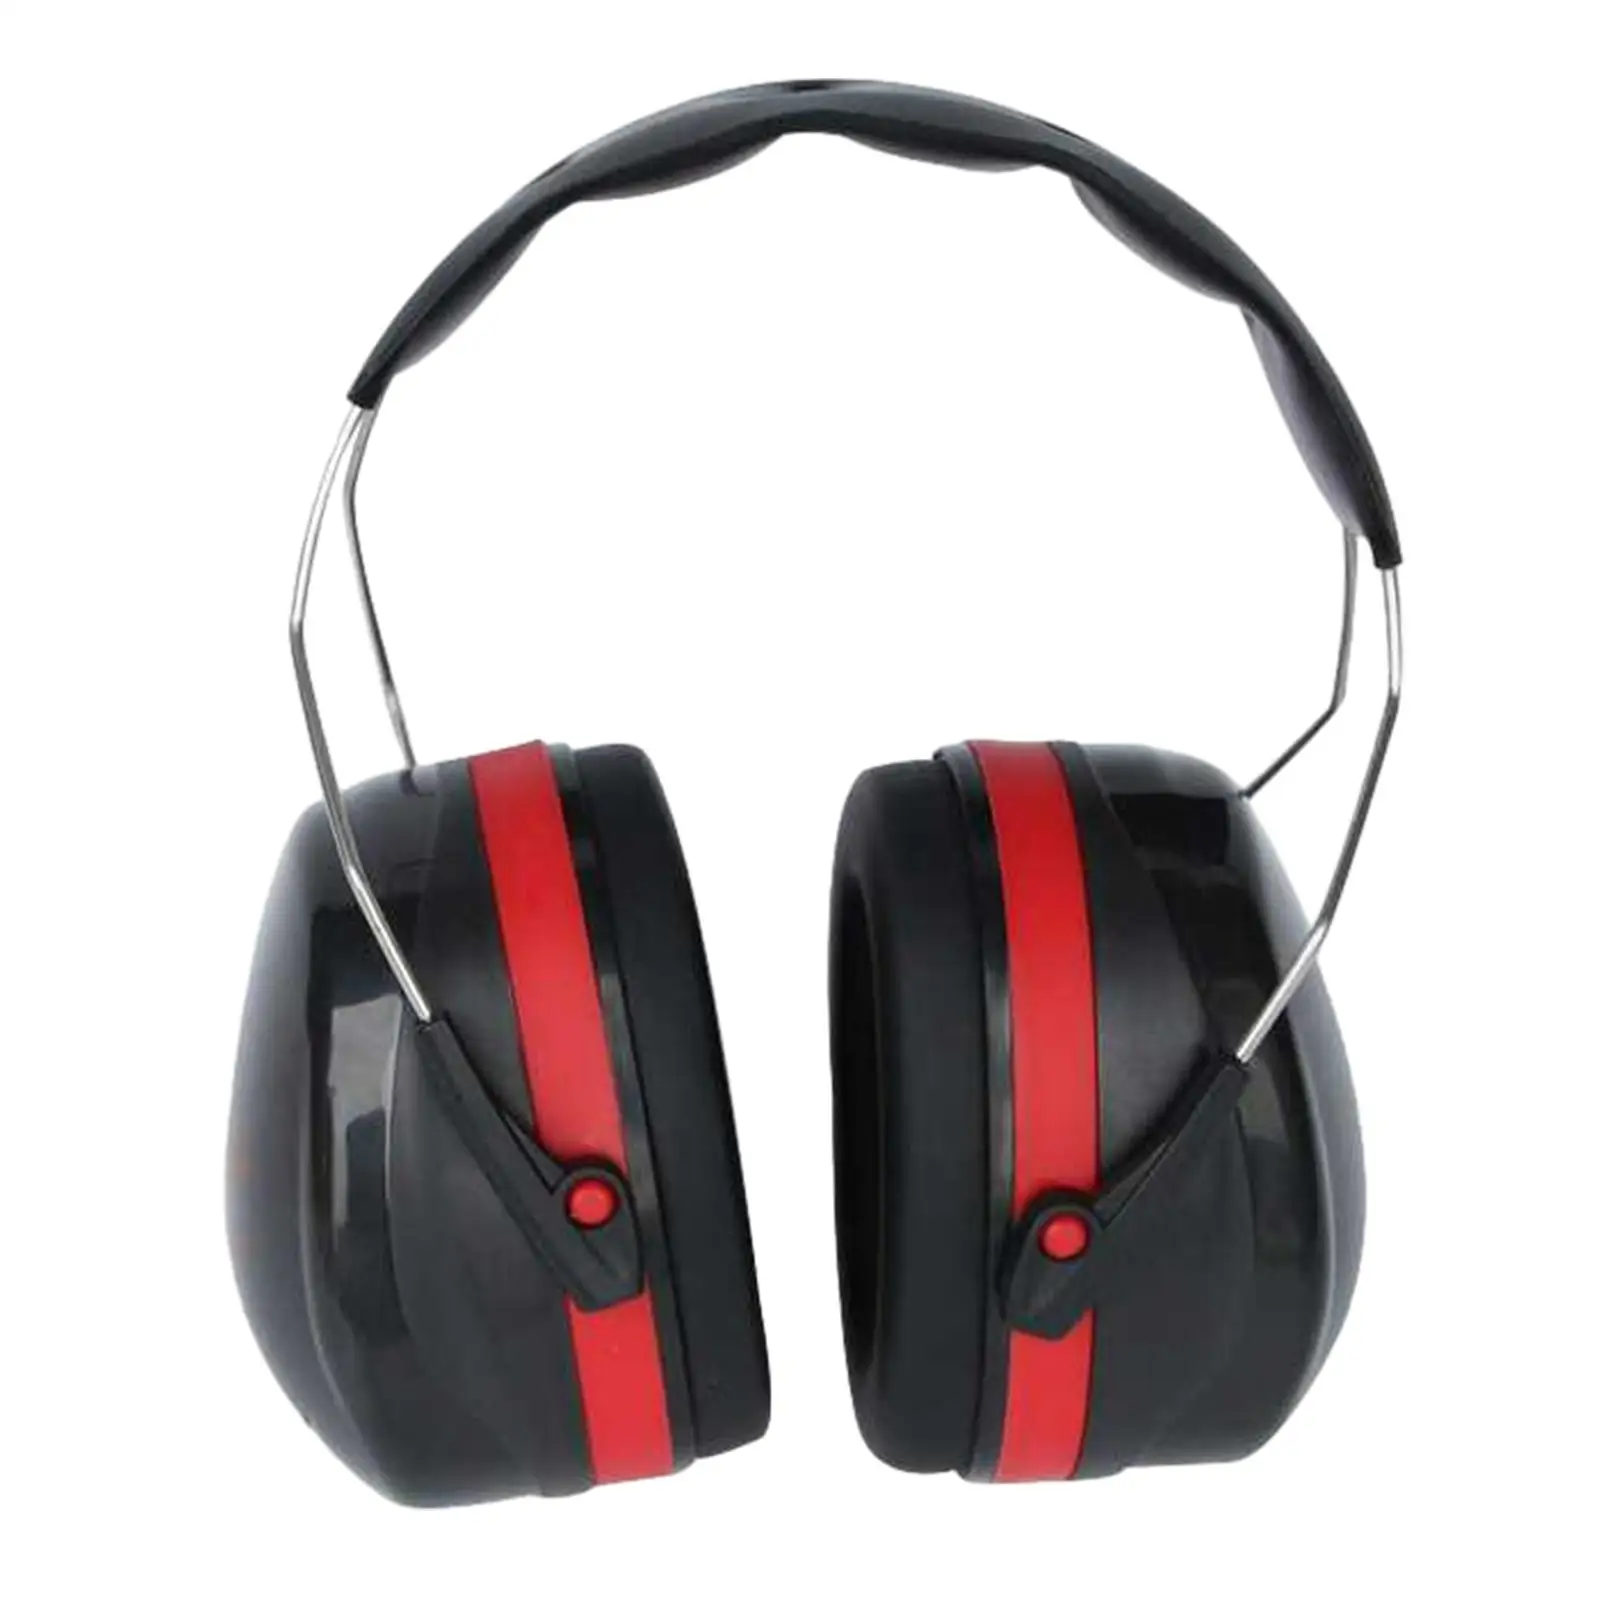 Noise Reduction Headphones Anti Noise Noise Cancelling No Pressure to Wear for Workshop Mowing Lawn Airplane Play Drum